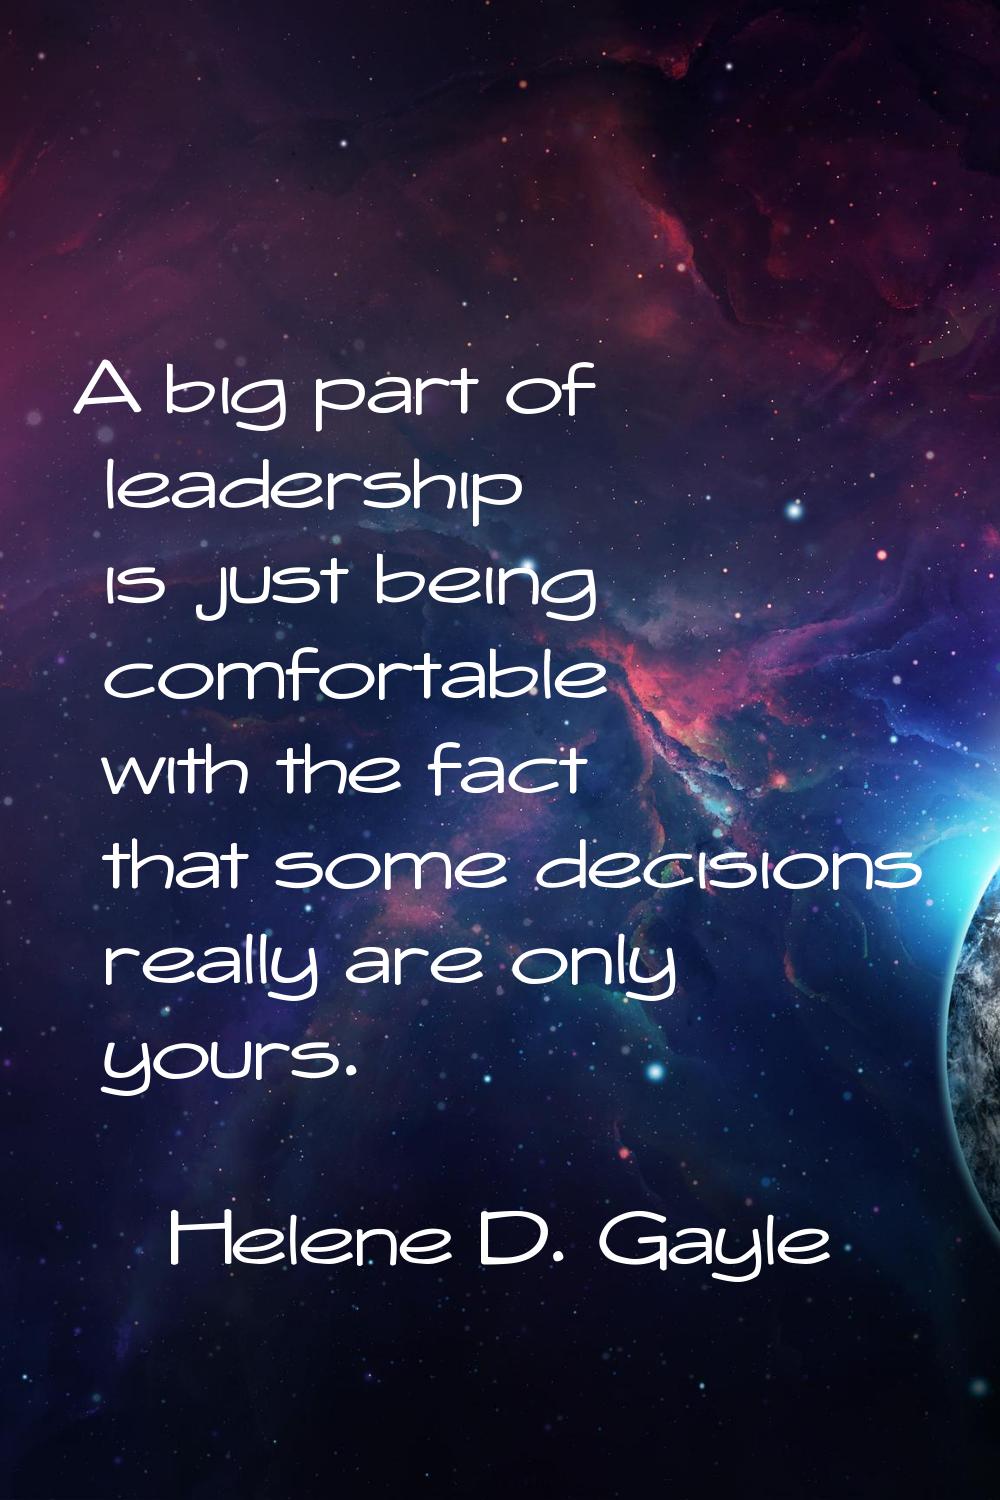 A big part of leadership is just being comfortable with the fact that some decisions really are onl